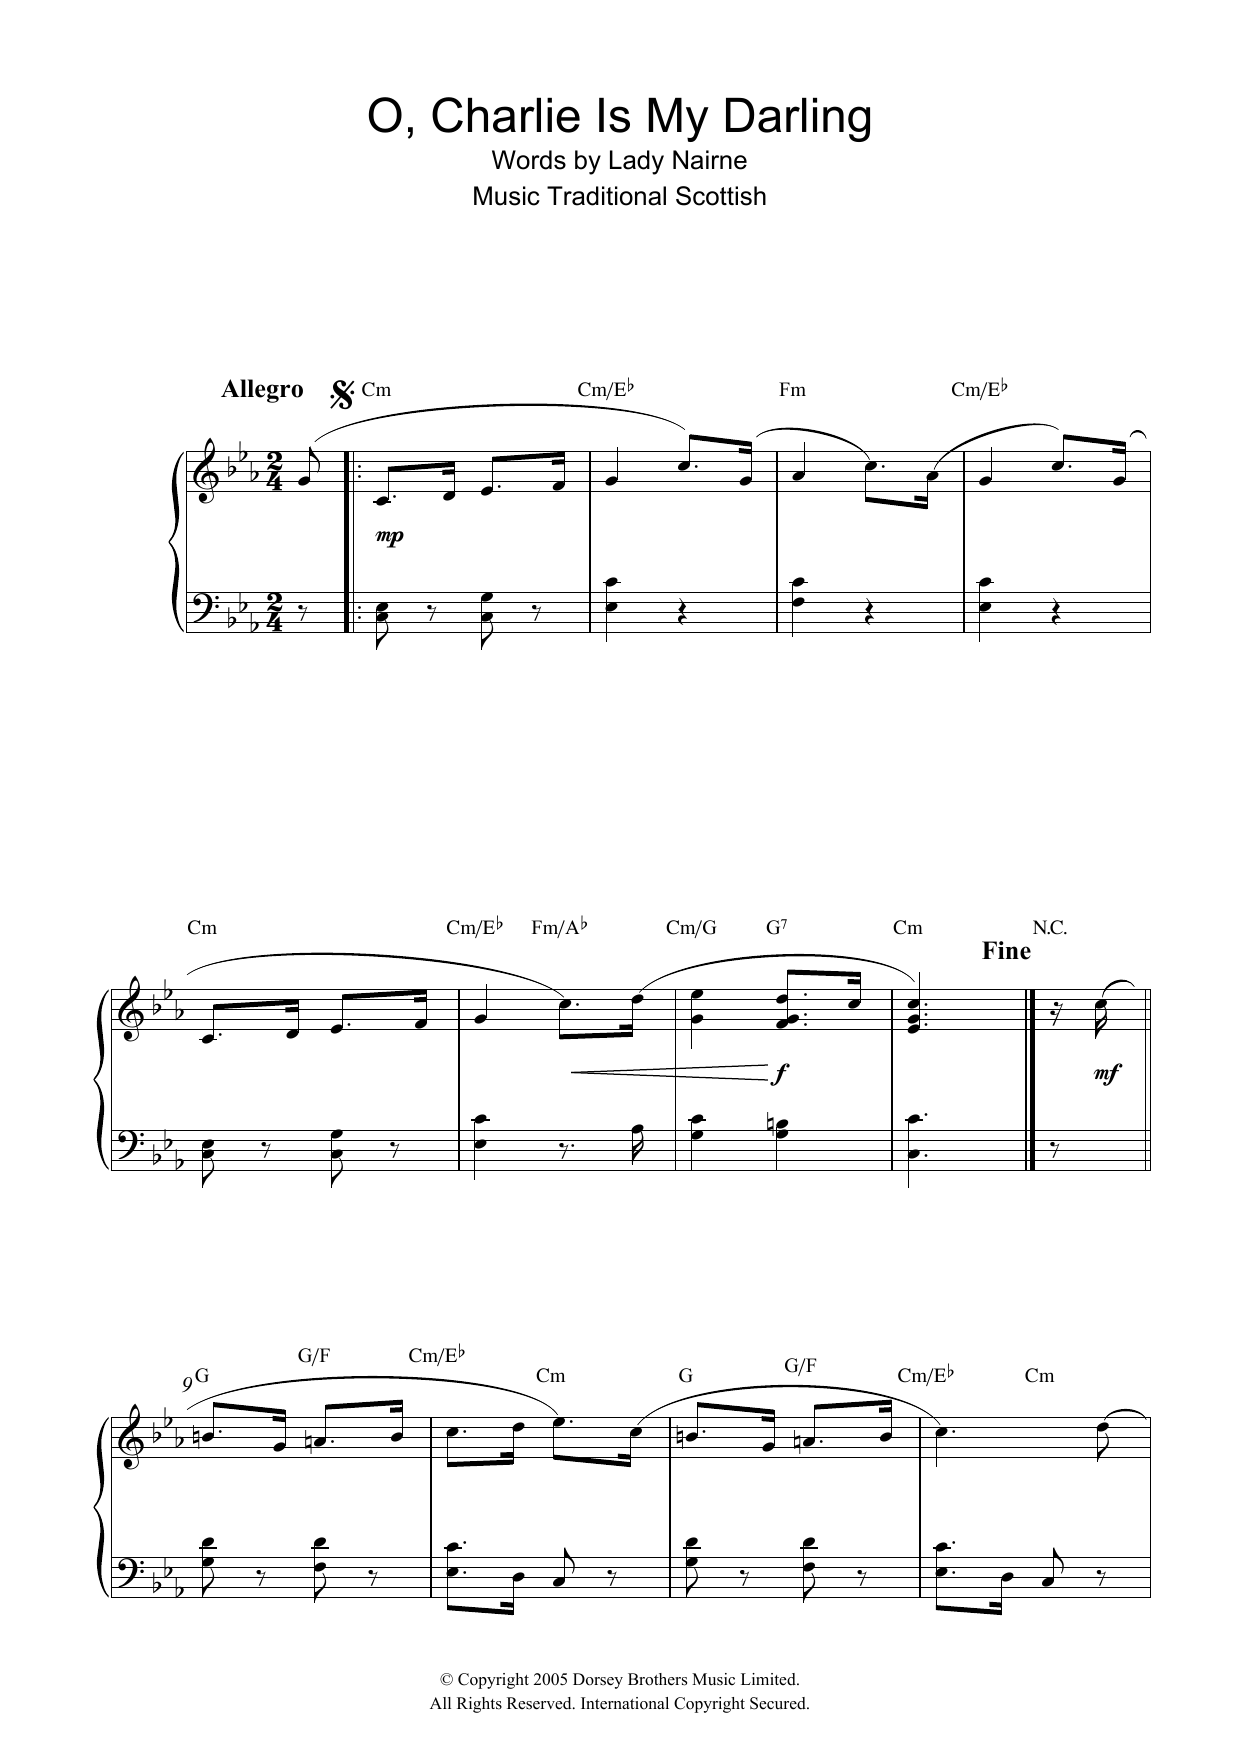 Scottish Folksong O, Charlie Is My Darling sheet music notes and chords. Download Printable PDF.